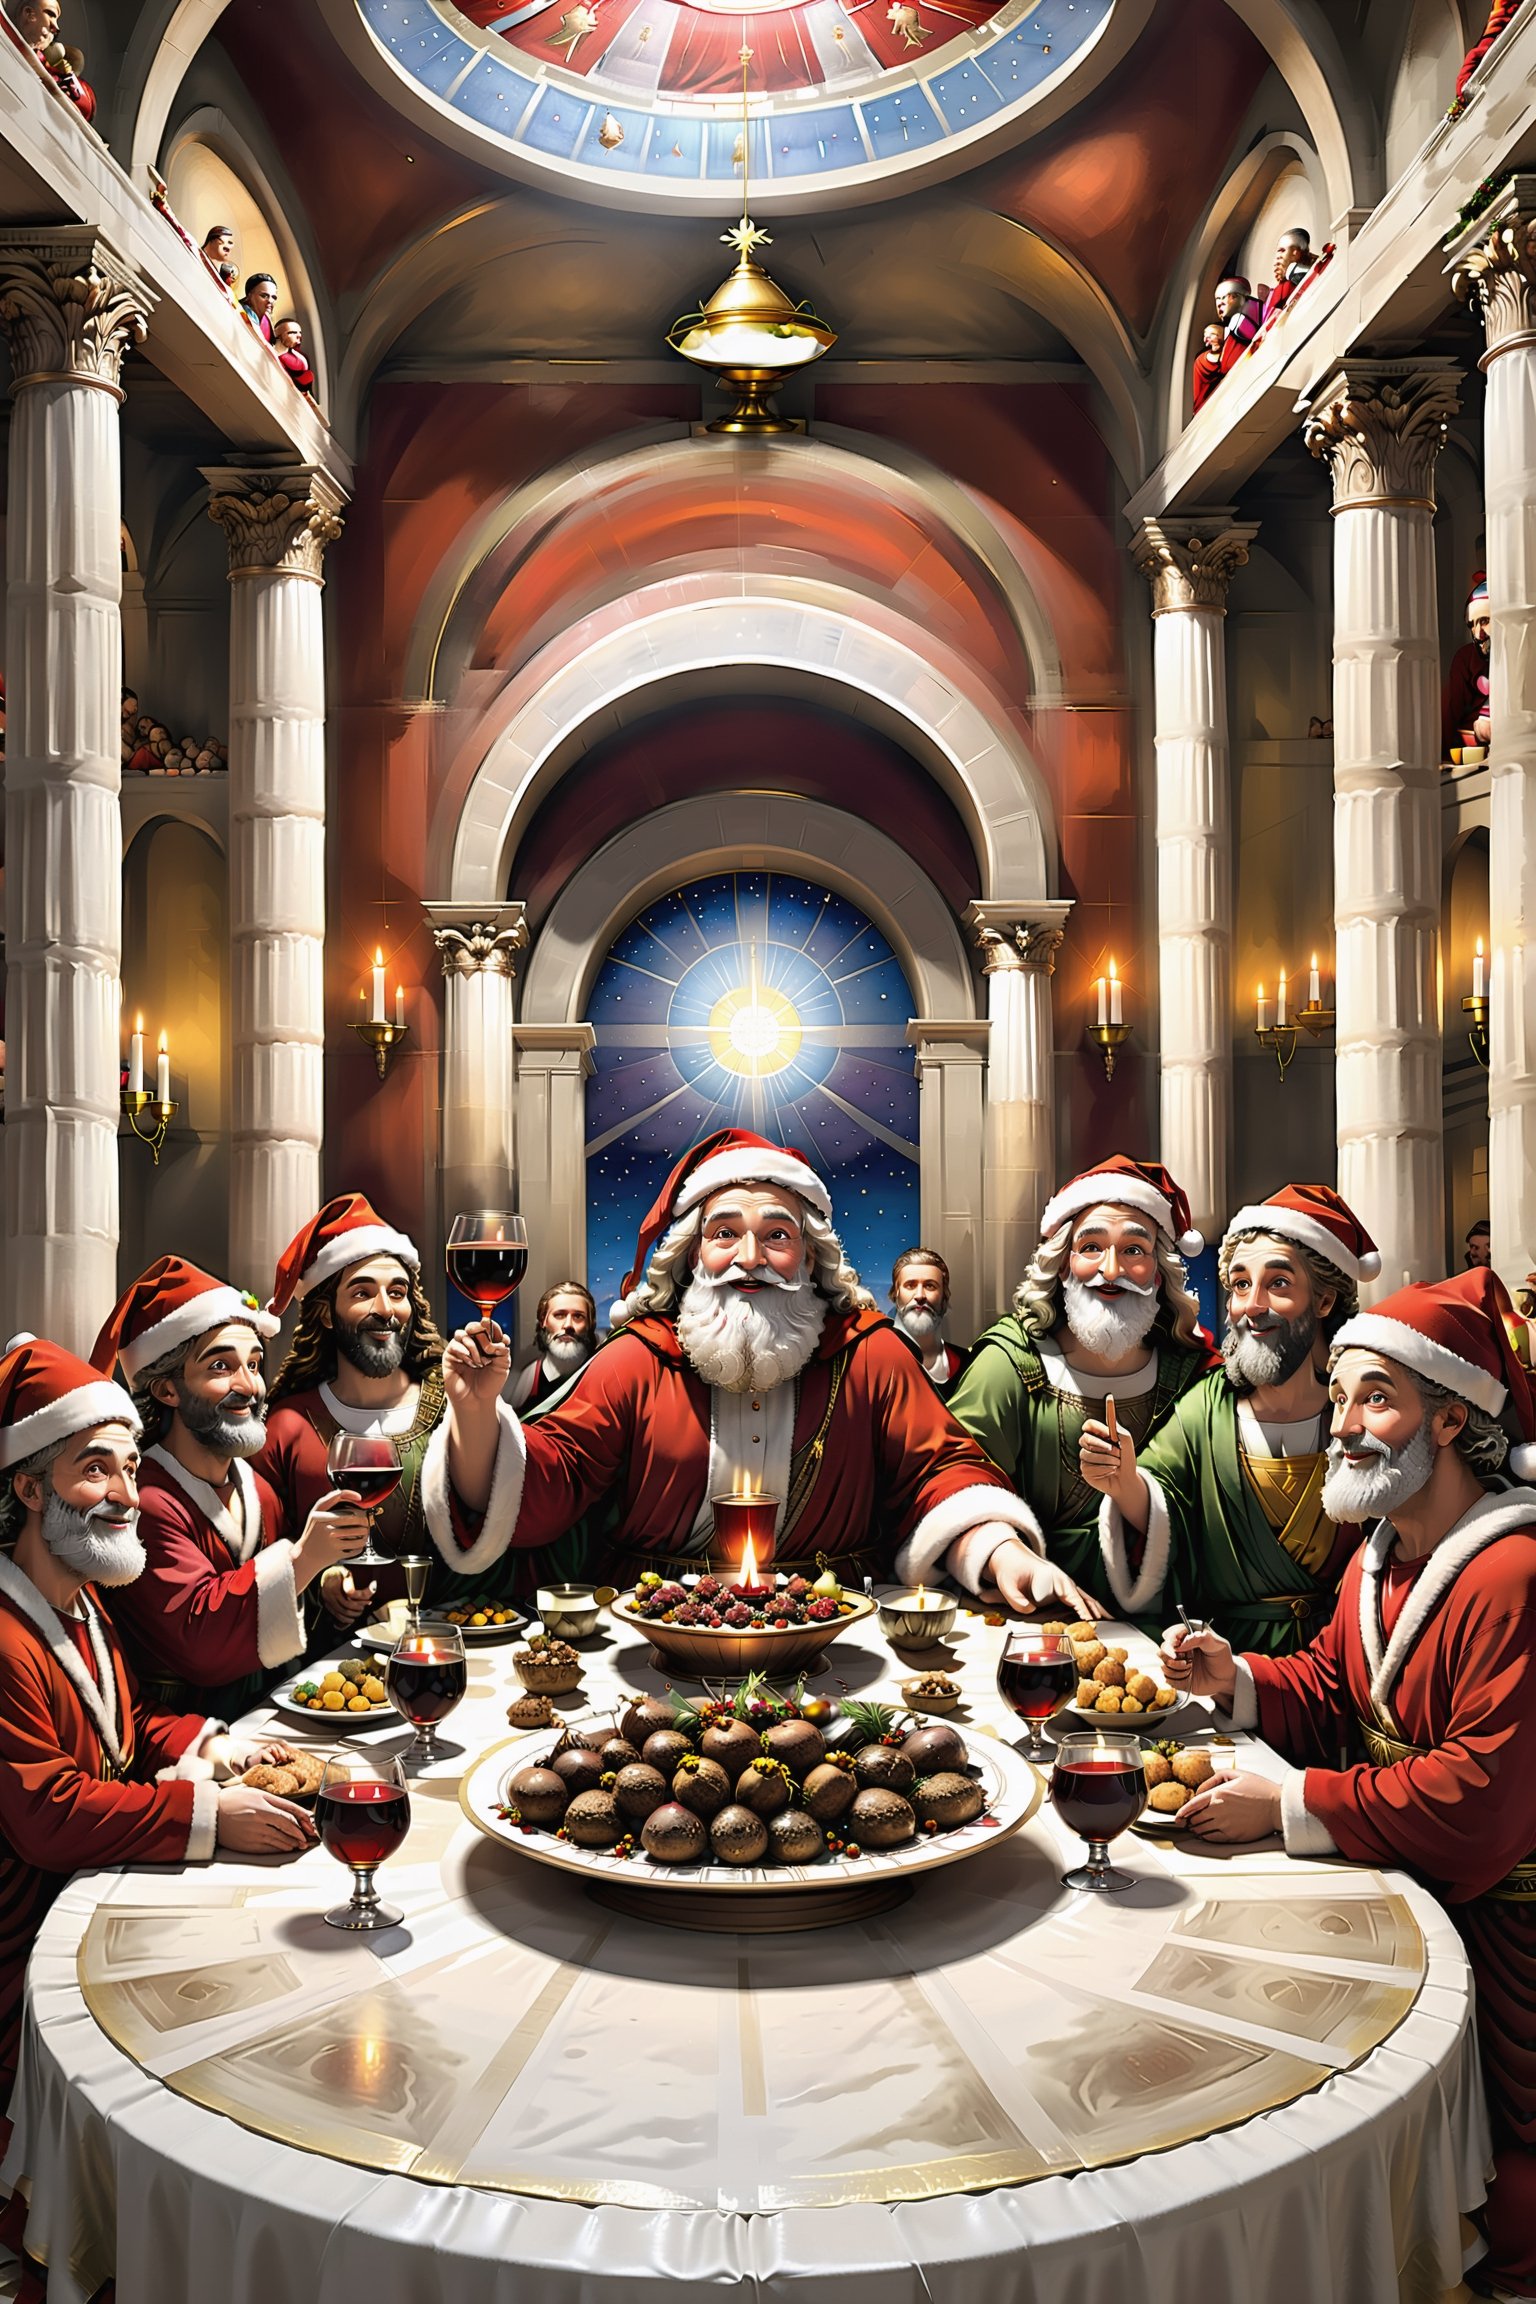 In this creative scene, Santa Claus appears as a modern Christmas legend in the famous artwork {(((The Last Supper)))}. The scene seems to have traveled back in time to put a new spin on this classic scene.

At the long dining table, Santa Claus sits in the place of Jesus Christ, surrounded by his twelve disciples, replacing the figures from the original painting with traditional Christmas decorations. The food on the table has also been transformed into Christmas specialties such as roast turkey, Christmas pudding and a variety of delicious treats.

Each of the disciples in the picture appears as a traditional Christmas character, which may be a reindeer, elf, snowman, and so on. They surround the table, displaying a solemn and cheerful atmosphere. The candelabra are lit with Christmas candles, adding color to the scene.

Santa Claus looks kind and holds a glass of wine in his hand as if he is saluting this special moment. His eyes sparkle with love and care, infusing the scene with a feeling of warmth.

The whole picture is a skillful fusion of culture and tradition, combining art classics with Christmas elements to create a scene that is both solemn and festive, bringing people a new artistic and cultural experience.